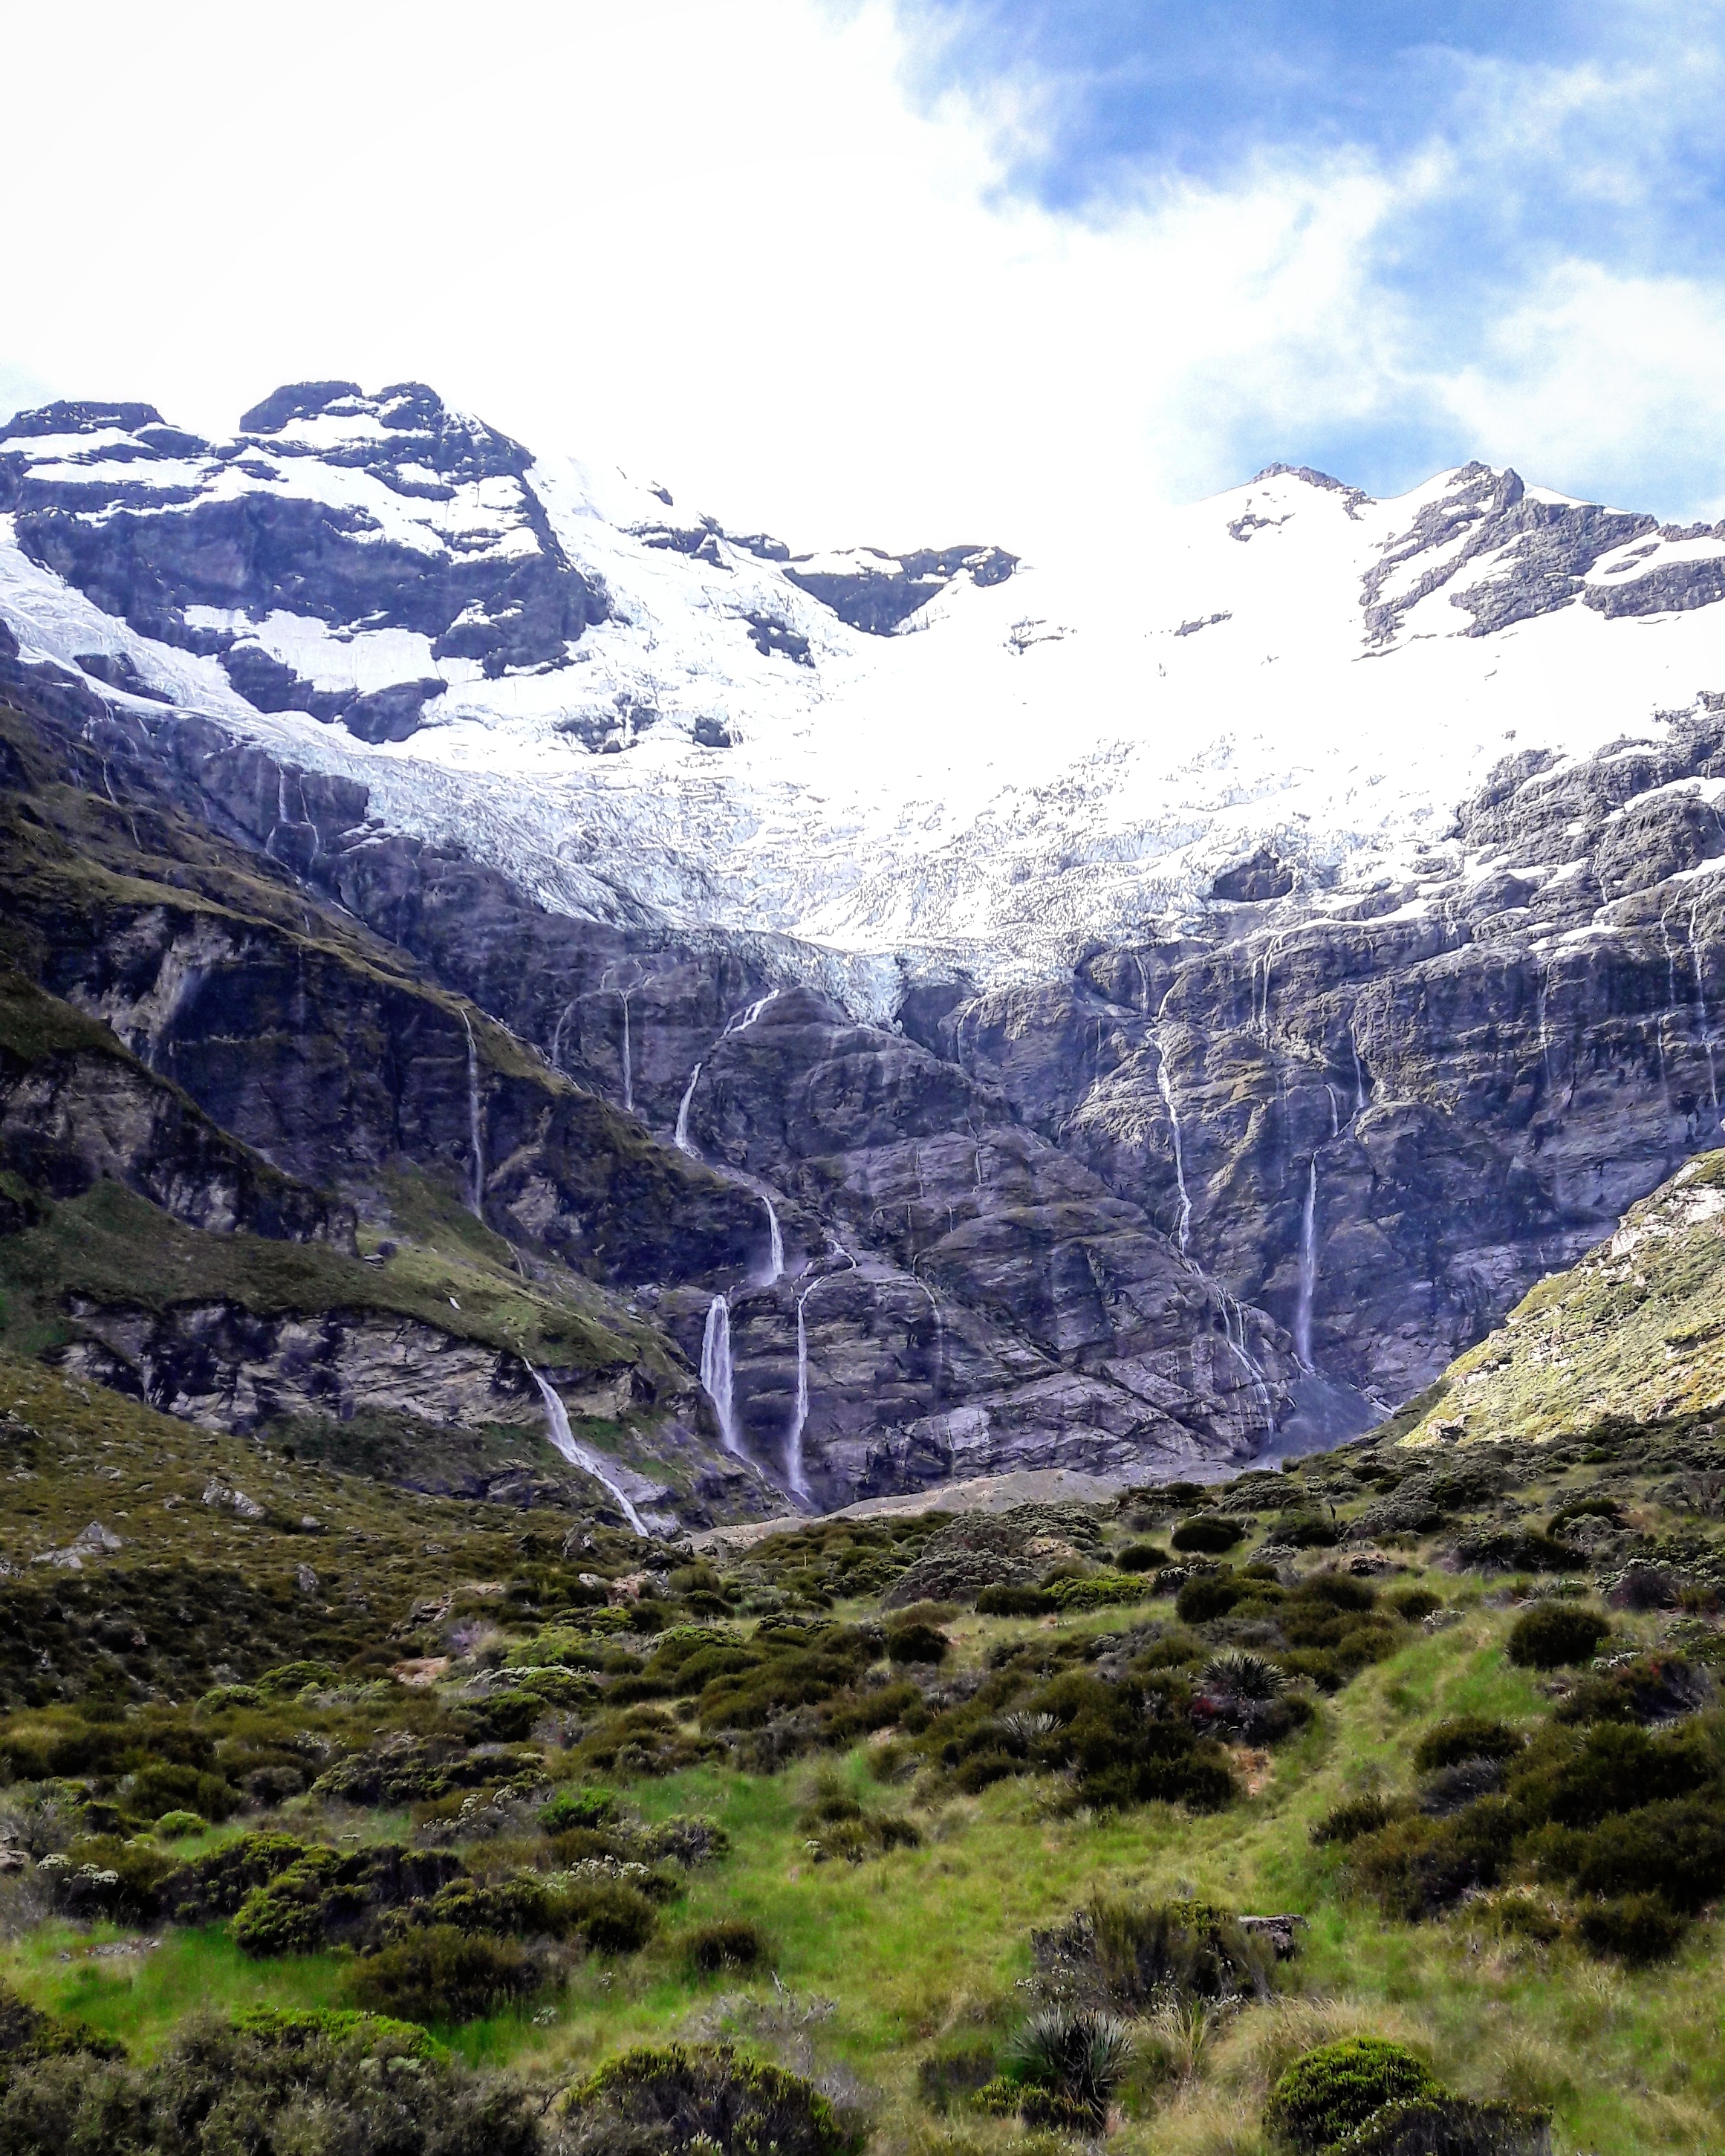 Hanging glaciers and waterfalls cascading off cliffs at the head of Earnslaw Burn